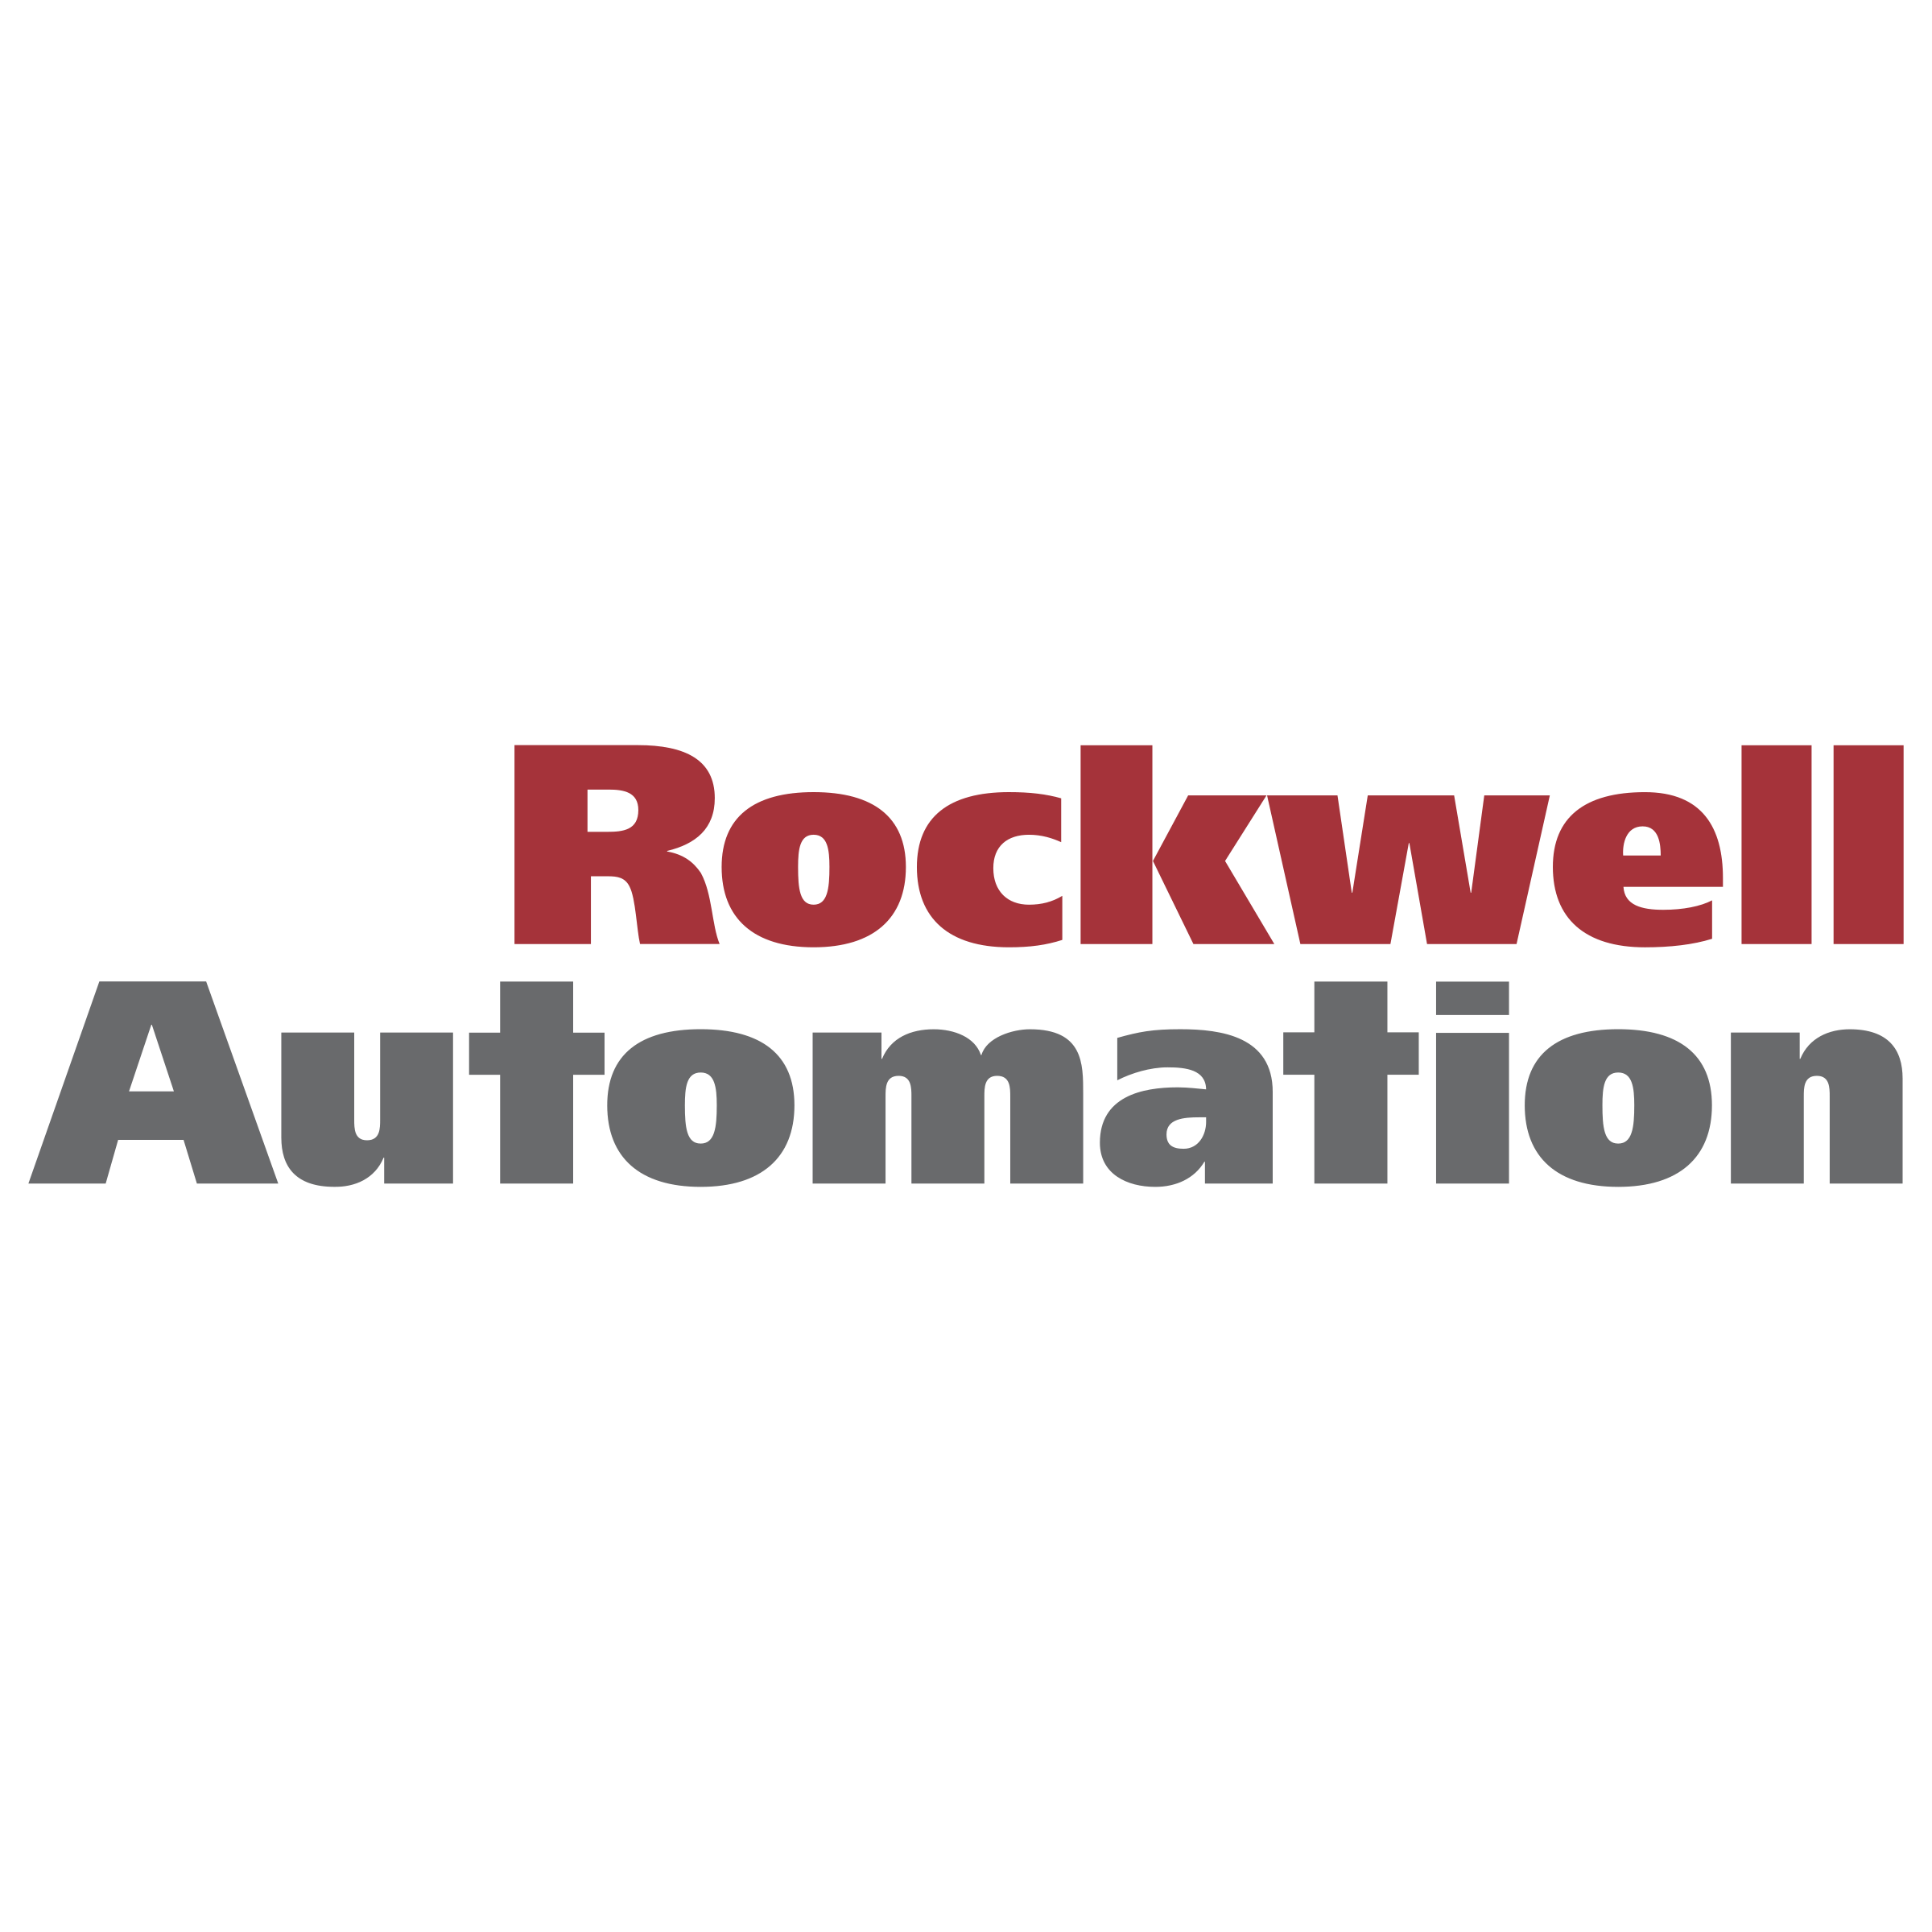 Rockwell Logo - Rockwell Automation Logo PNG Transparent & SVG Vector - Freebie Supply